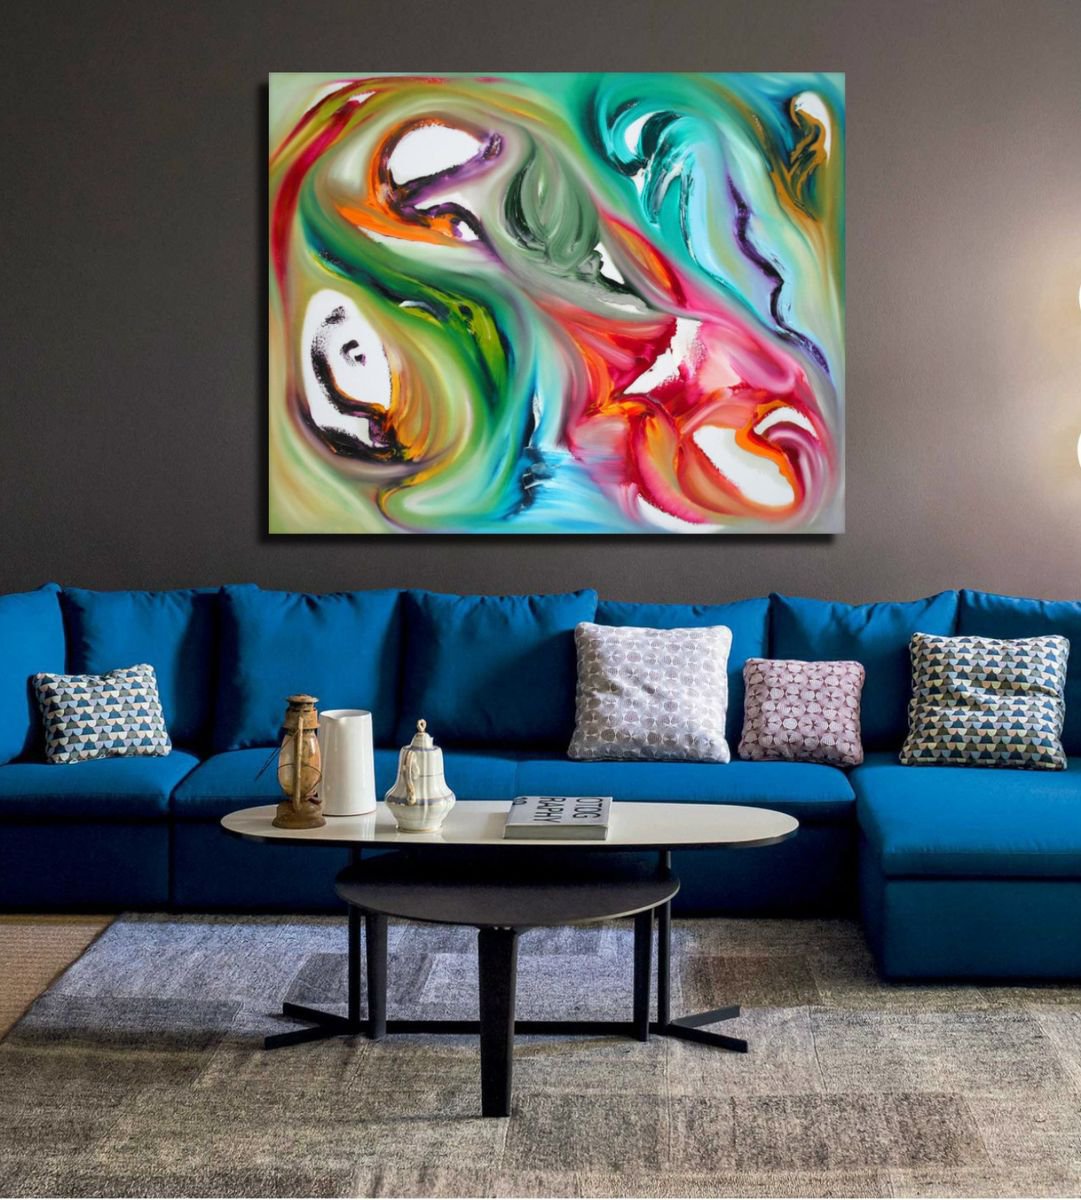 Infinity, 100x80 cm, LARGE XXL, Original abstract painting, oil on canvas by Davide De Palma